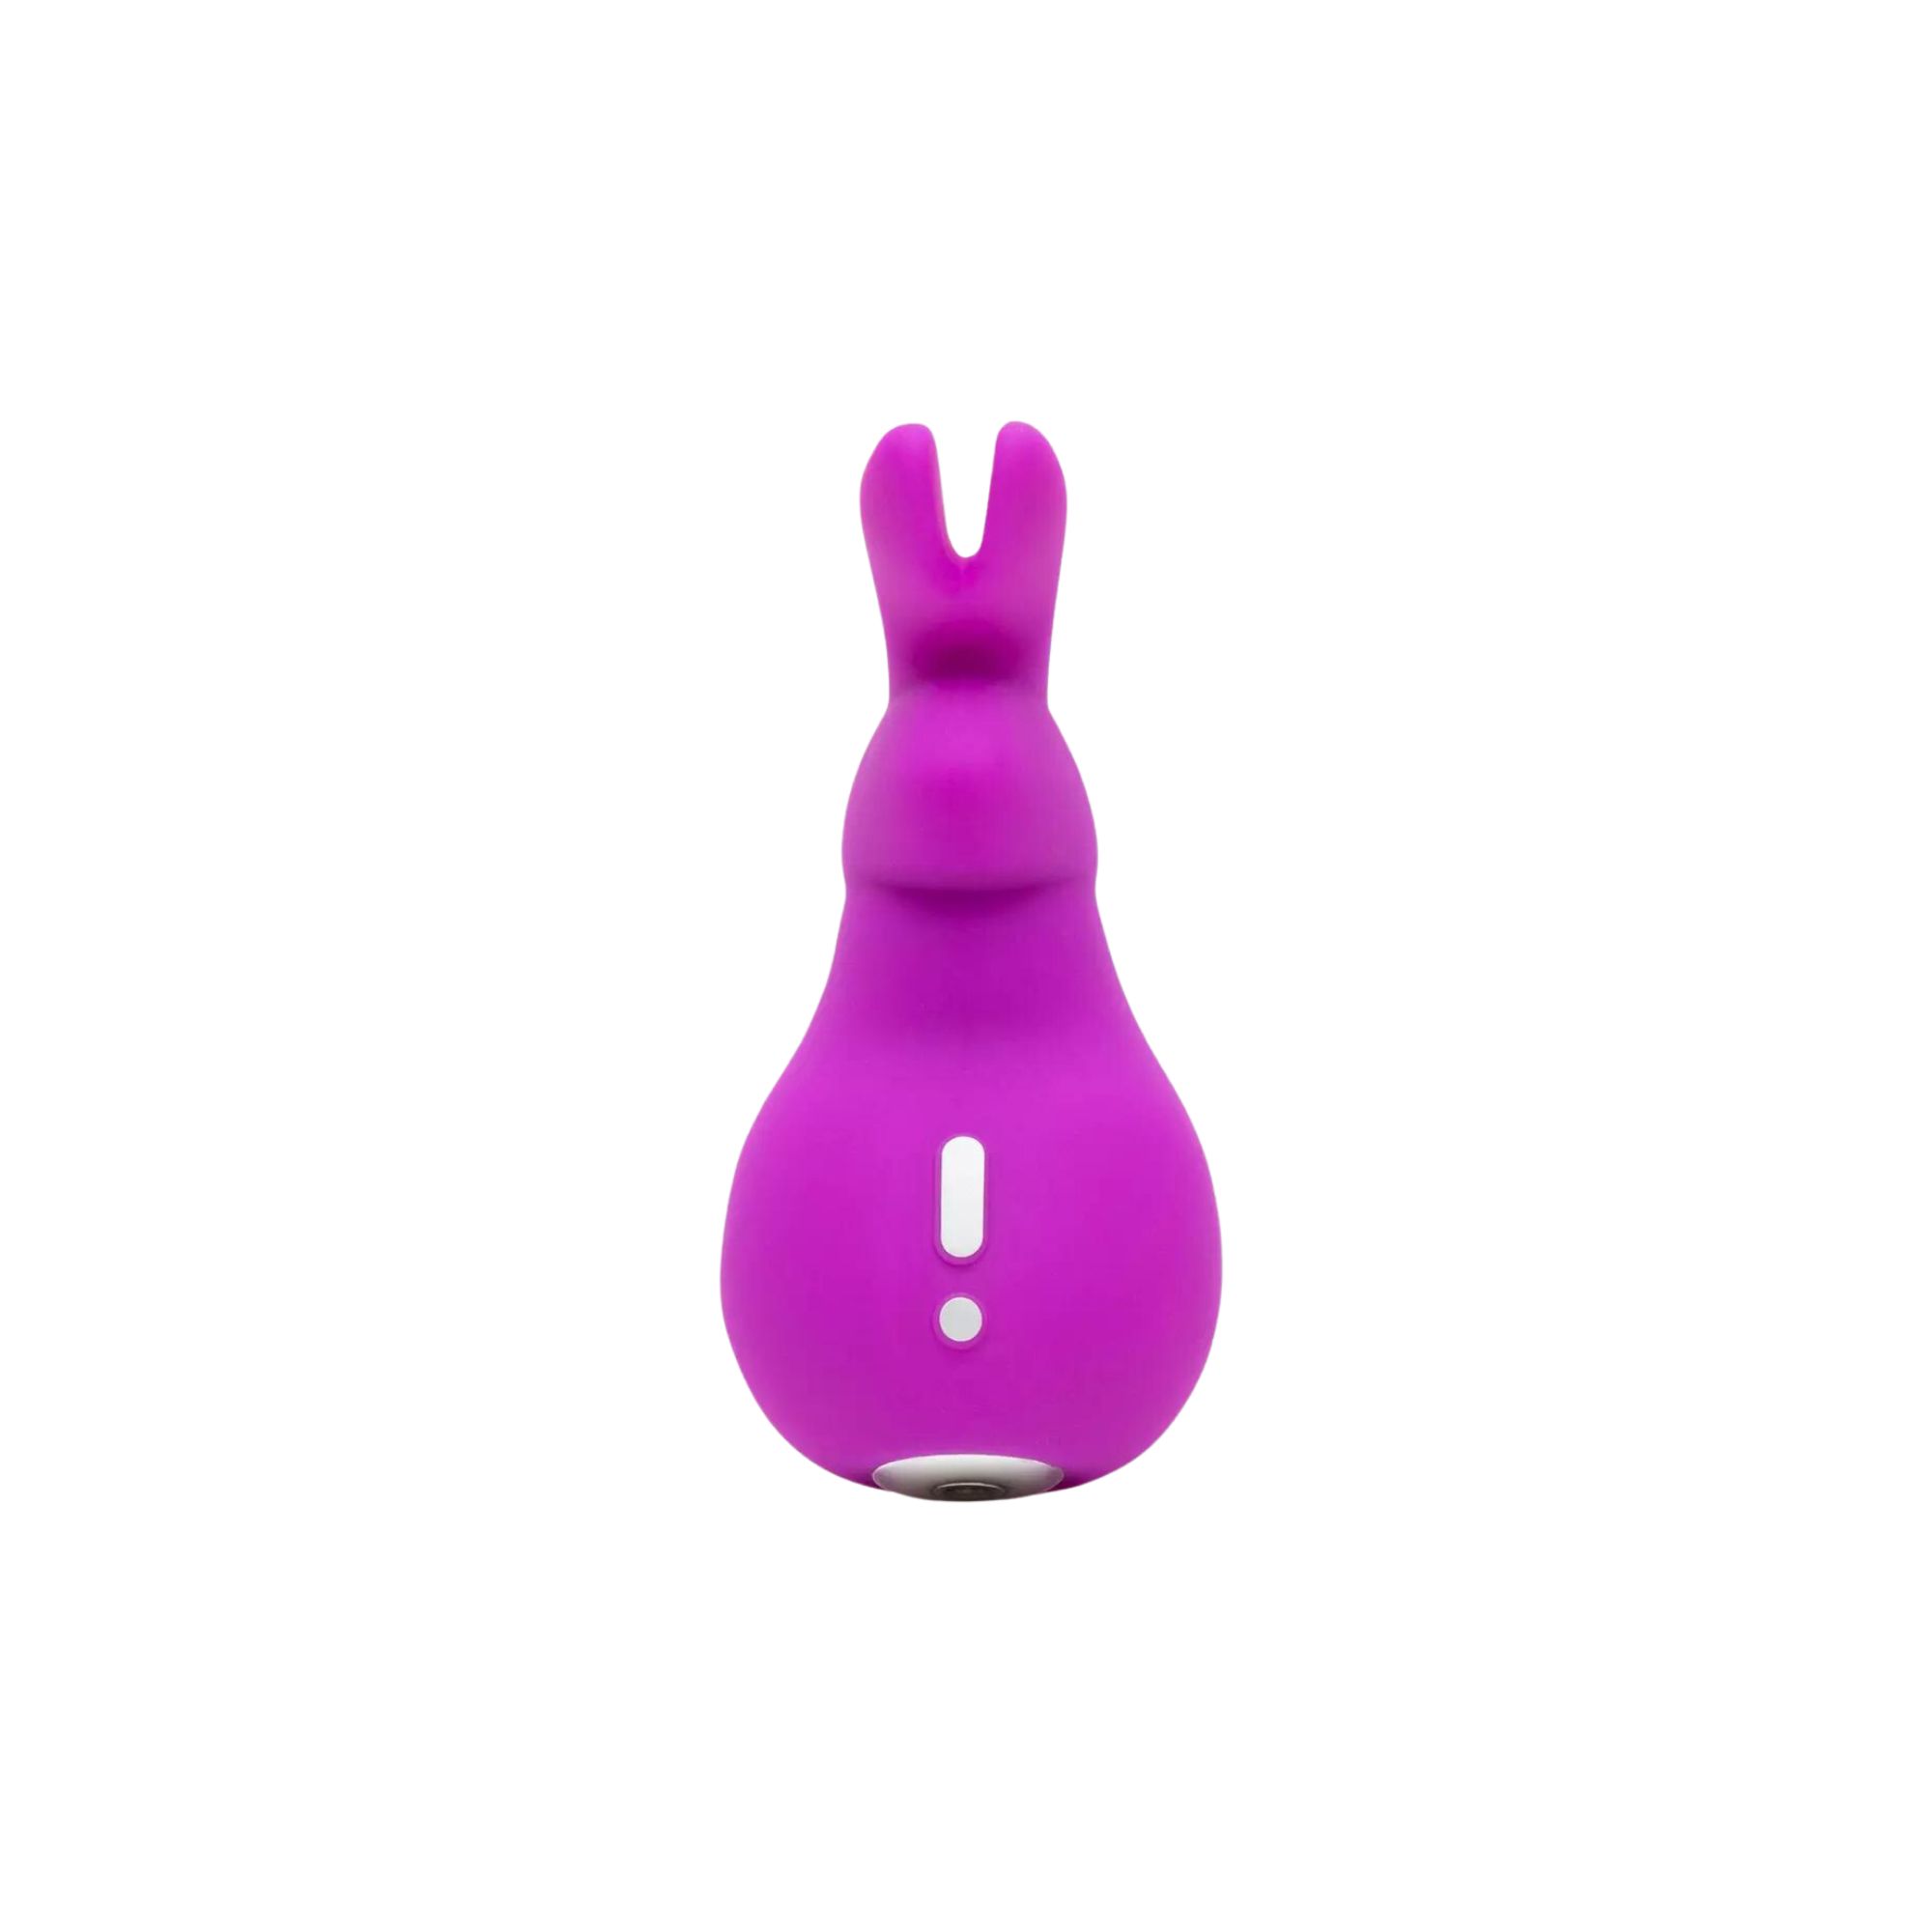 The  Happy Rabbit Mini Ears Rechargeable Clitoral Vibrator is the best rabbit vibrators for its rabbit ears.